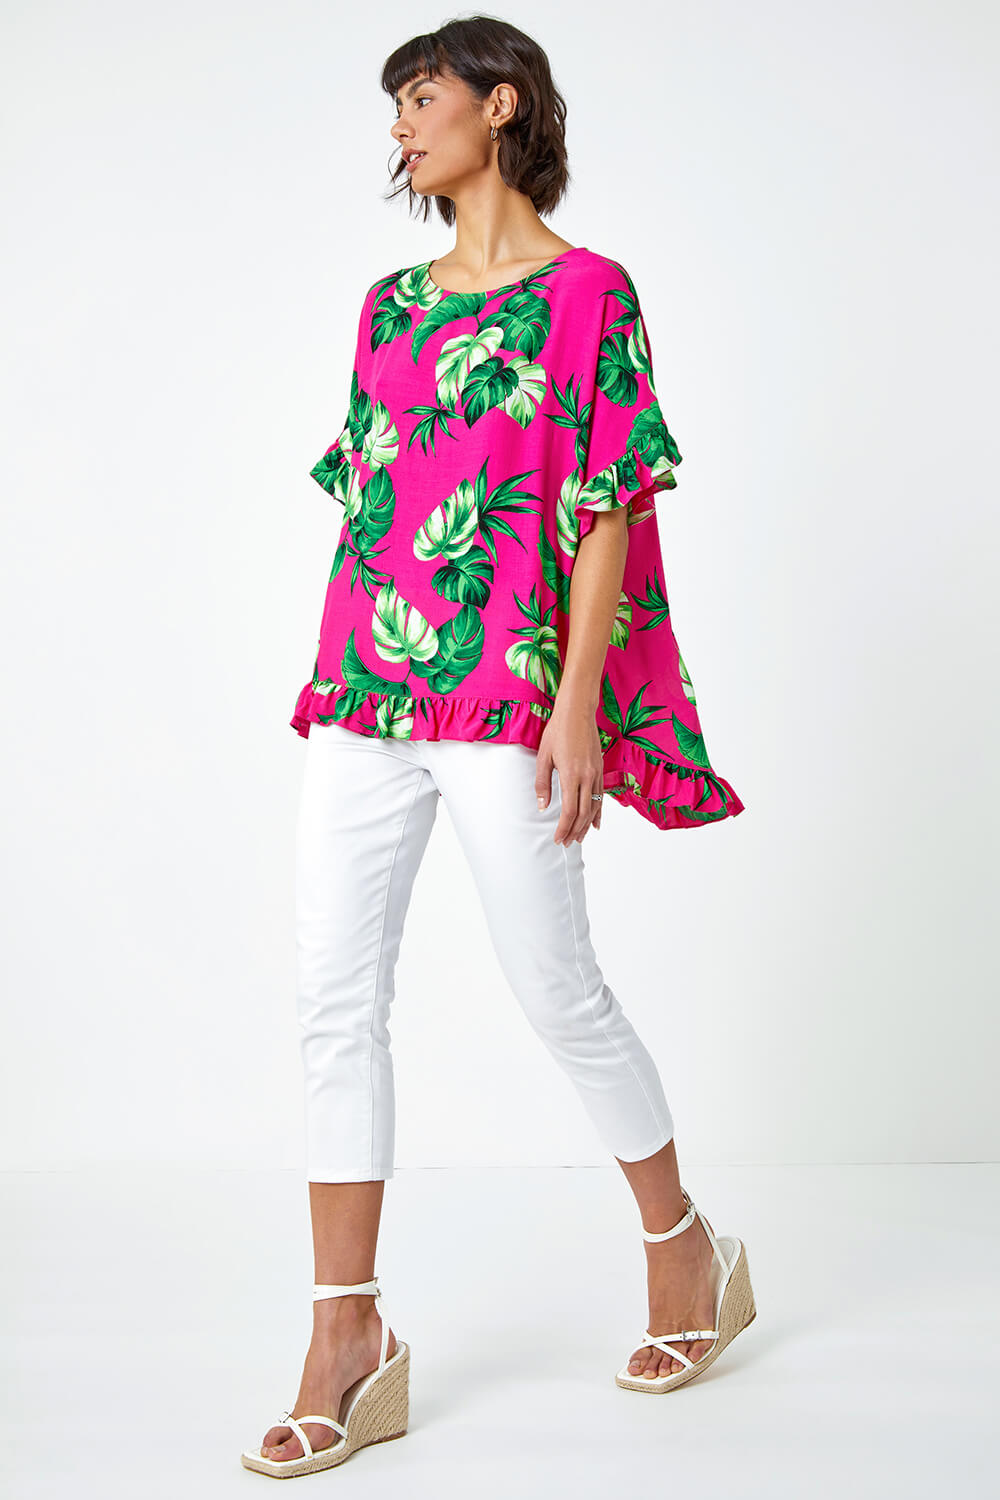 PINK Palm Print Frill Detail Oversized Top, Image 4 of 5